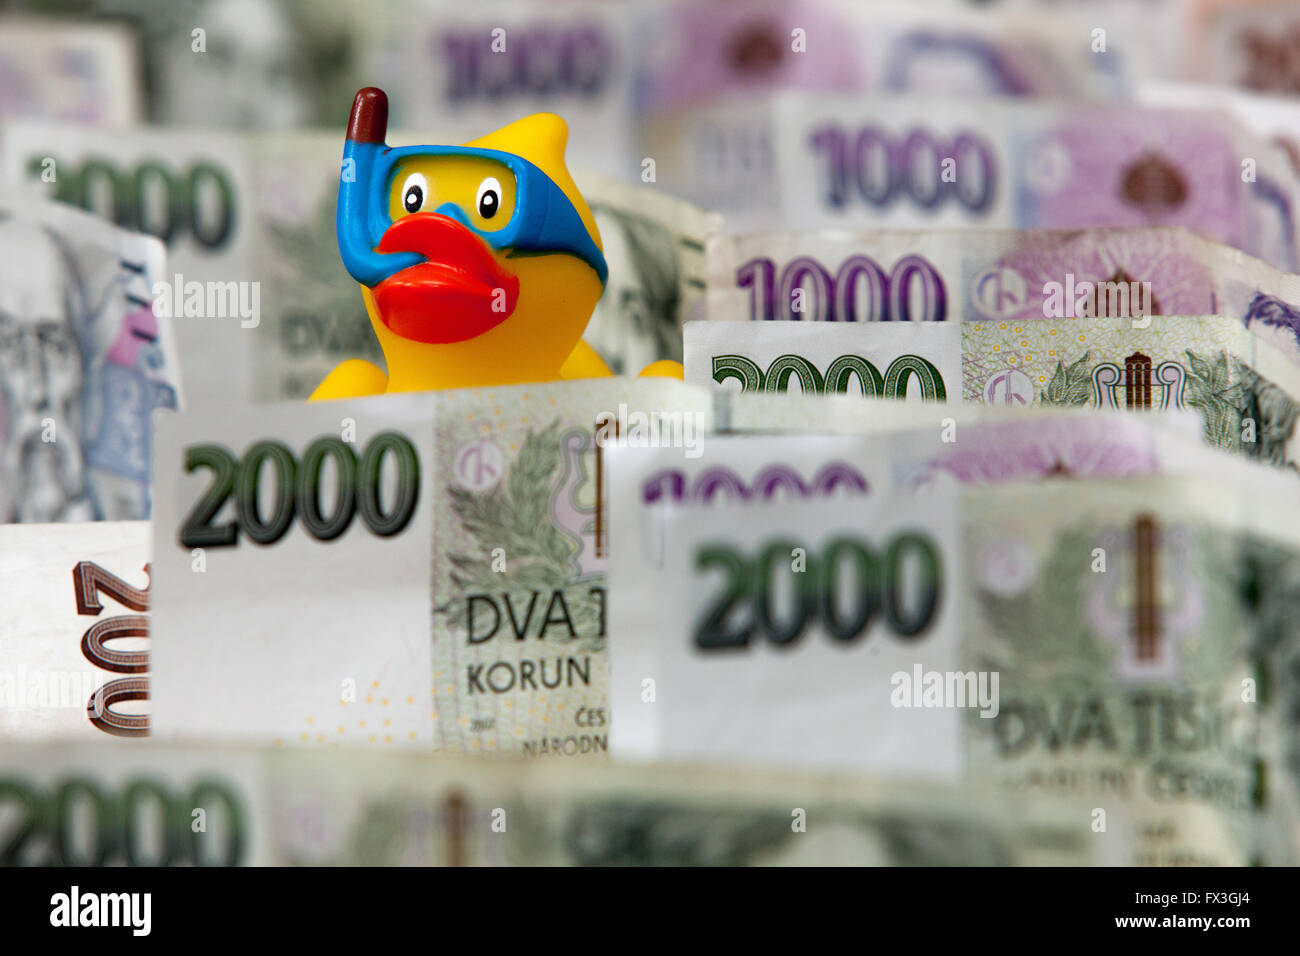 Czech paper money and a rubber duck in the goggles, snorkel Stock Photo